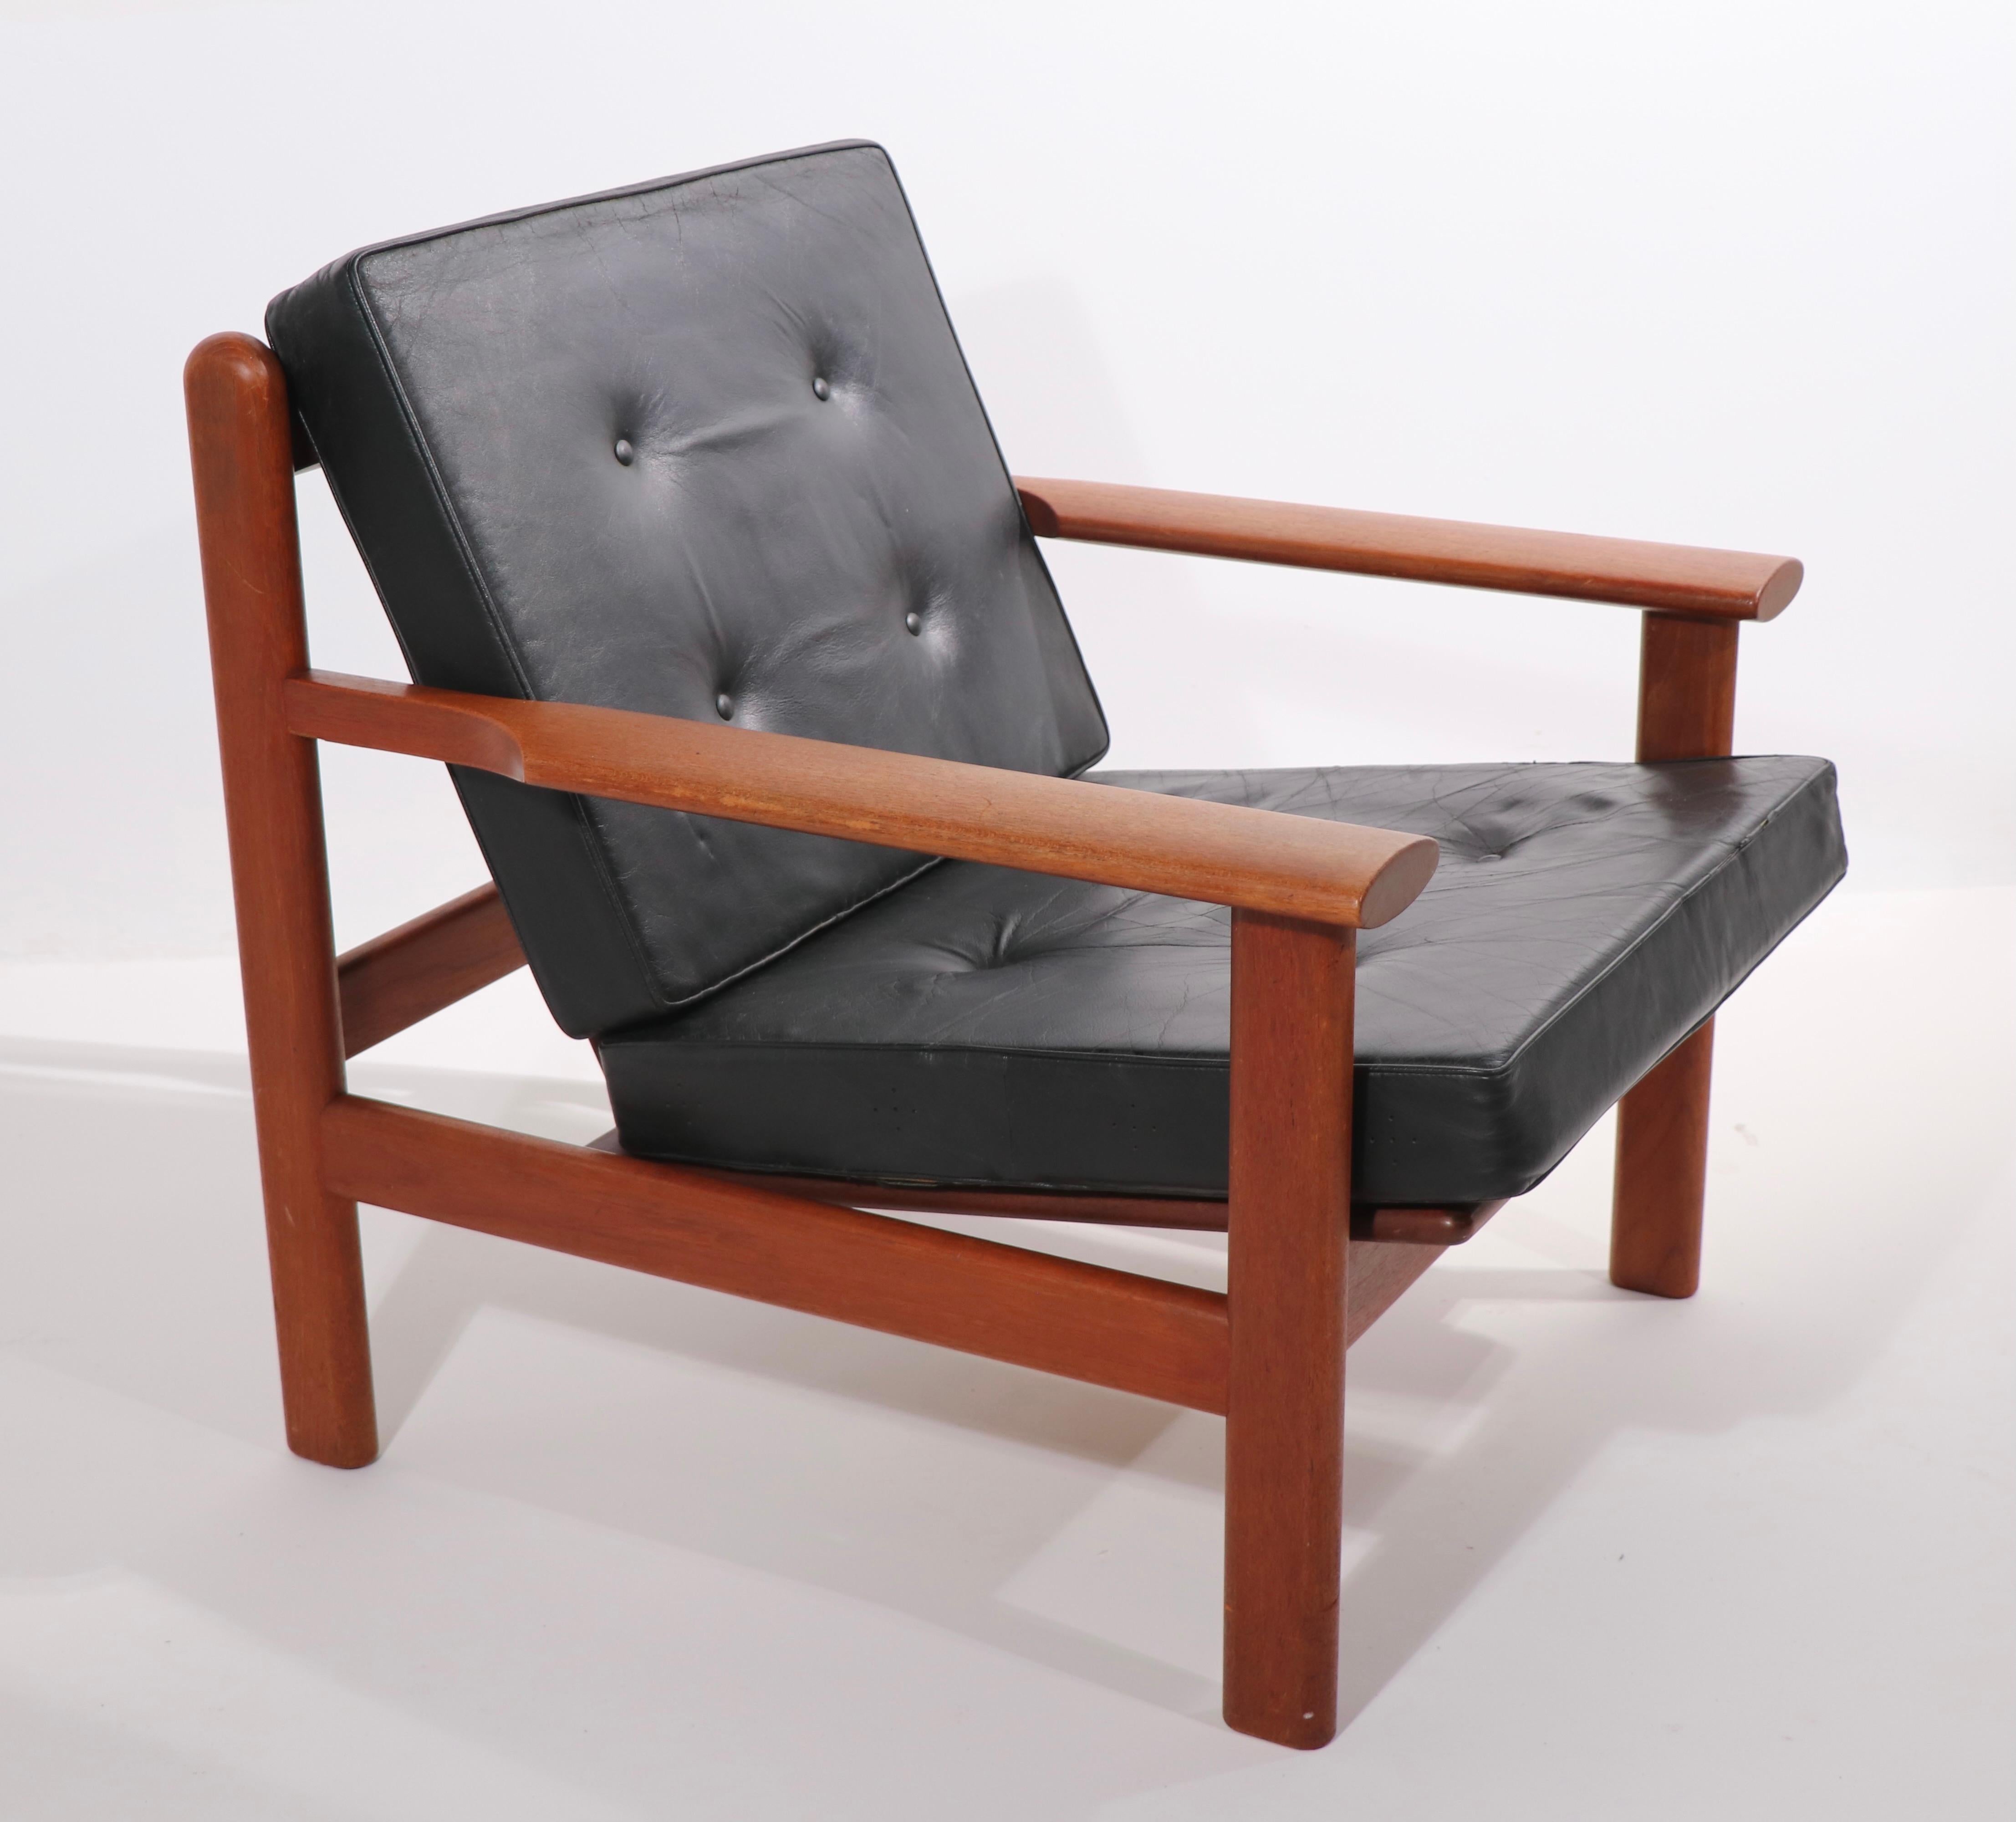 Pair of Danish Modern Lounge Chairs by Poul Volther for Frem Rolje In Good Condition For Sale In New York, NY